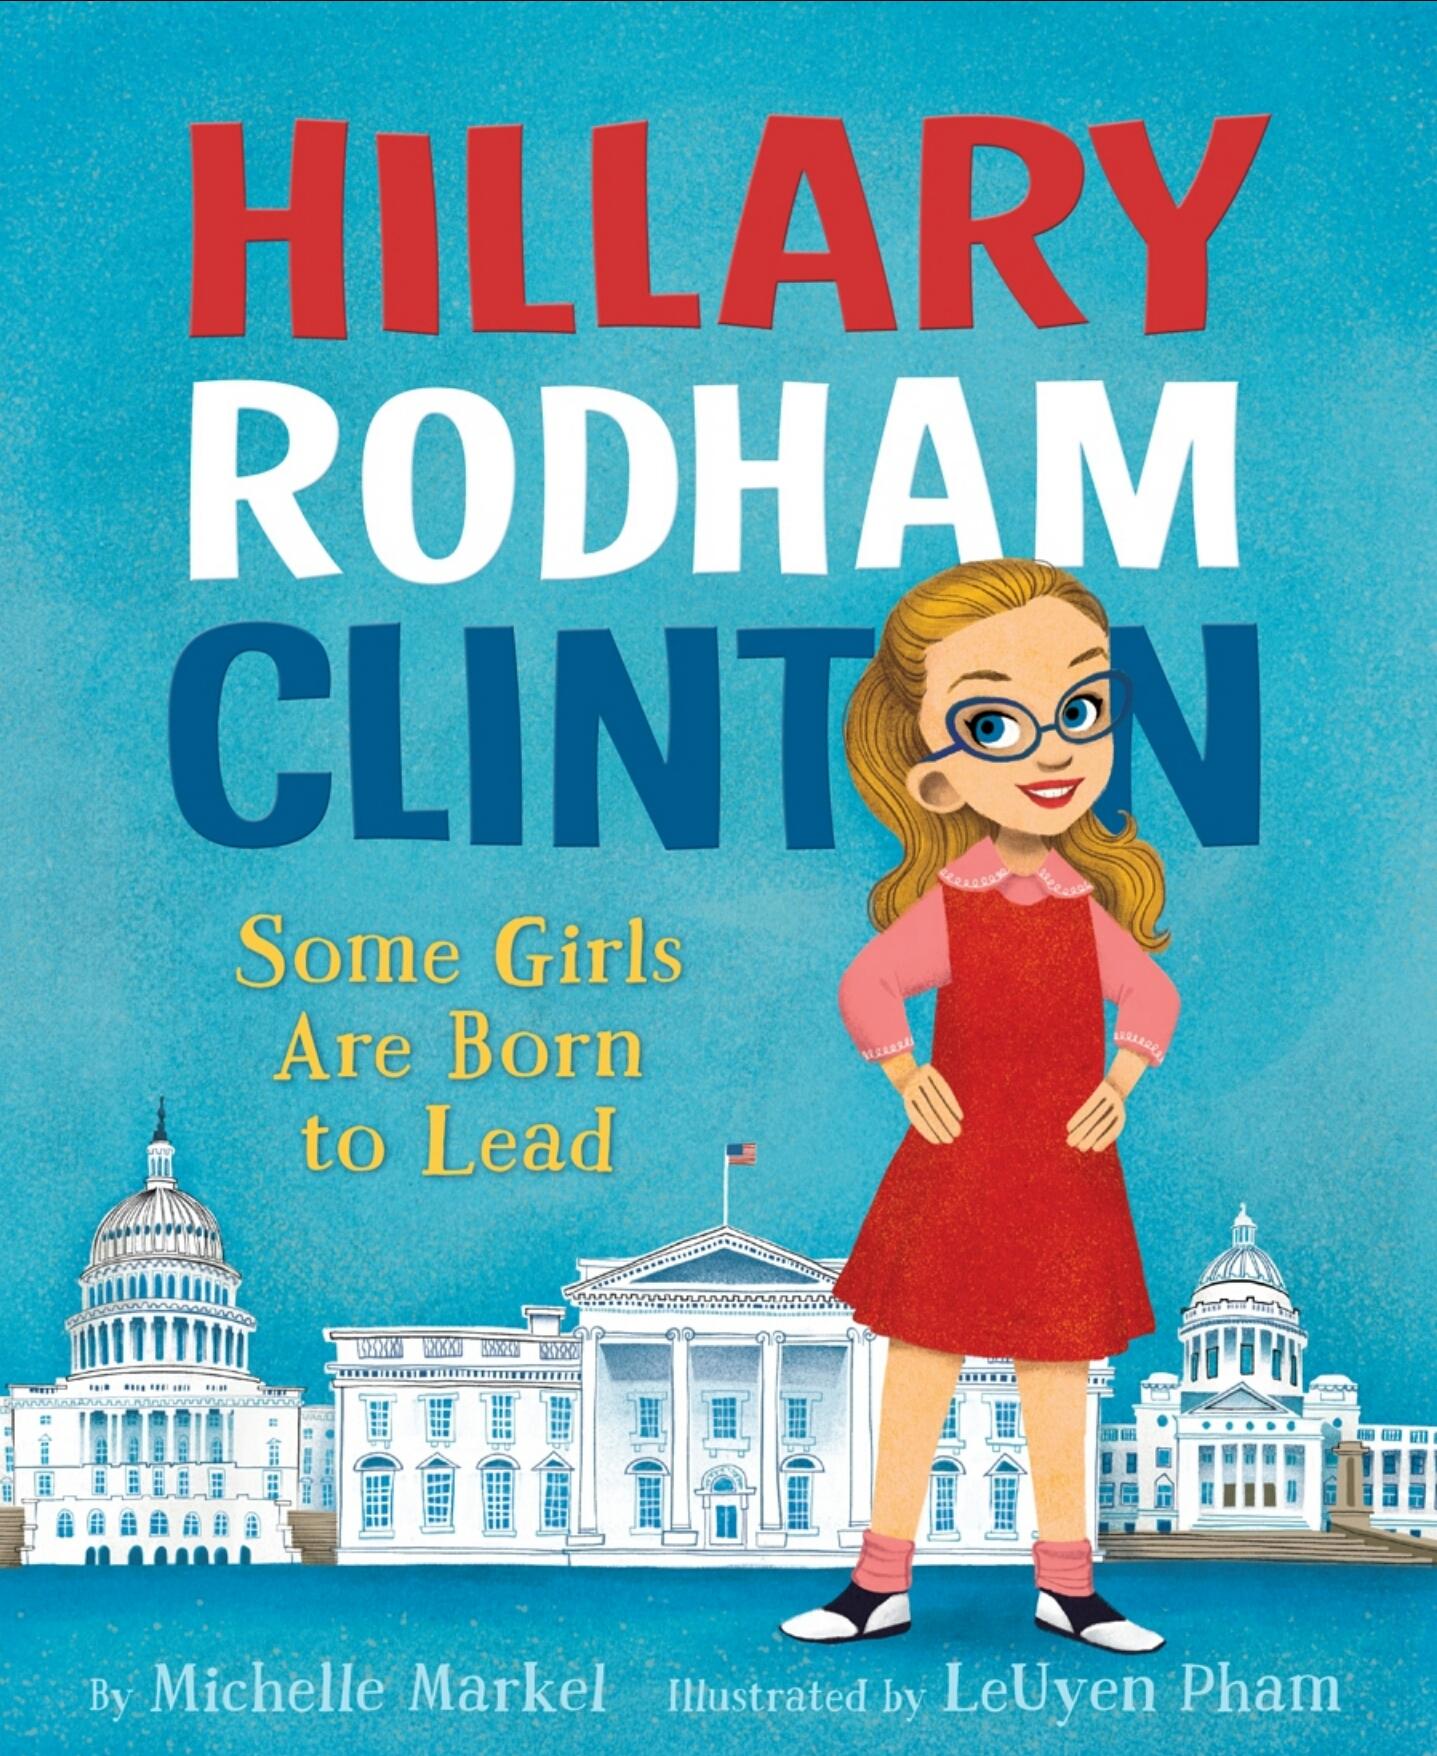 Michelle Markel and LeUyen Pham, Hillary Rodham Clinton: Some Girls Are Born to Lead (2016)